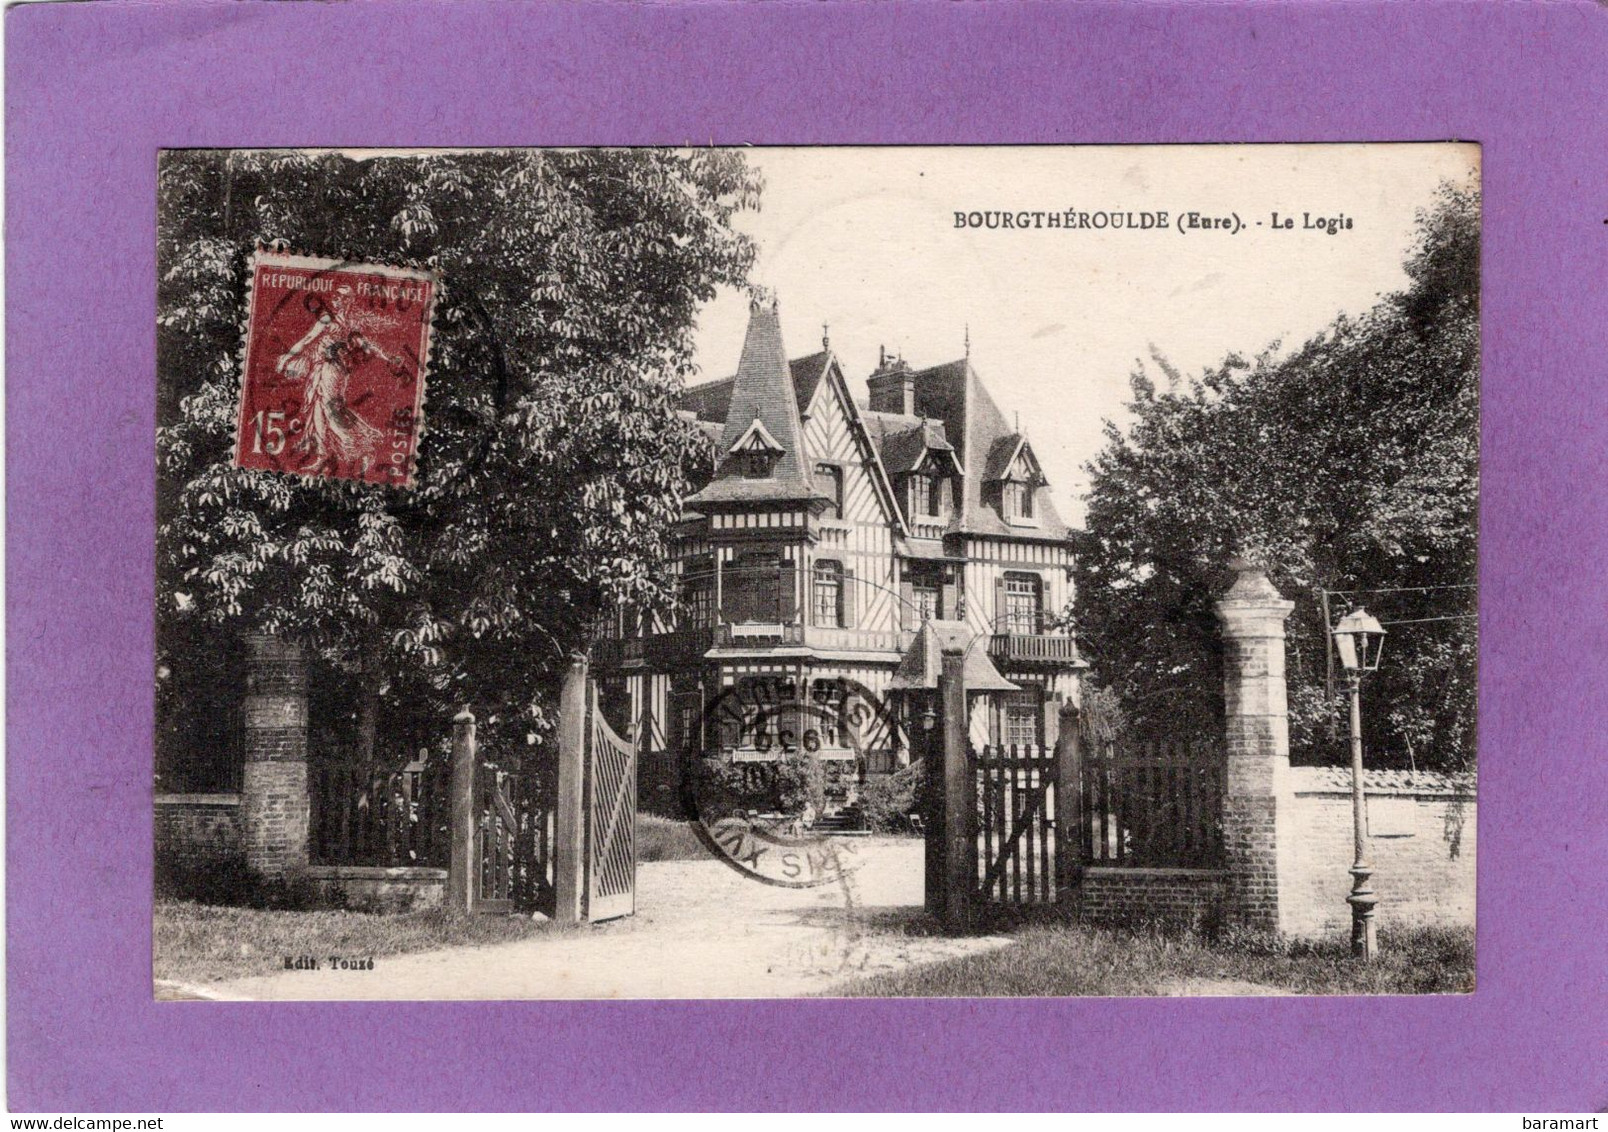 27 BOURGTHÉROULDE Le Logis - Bourgtheroulde